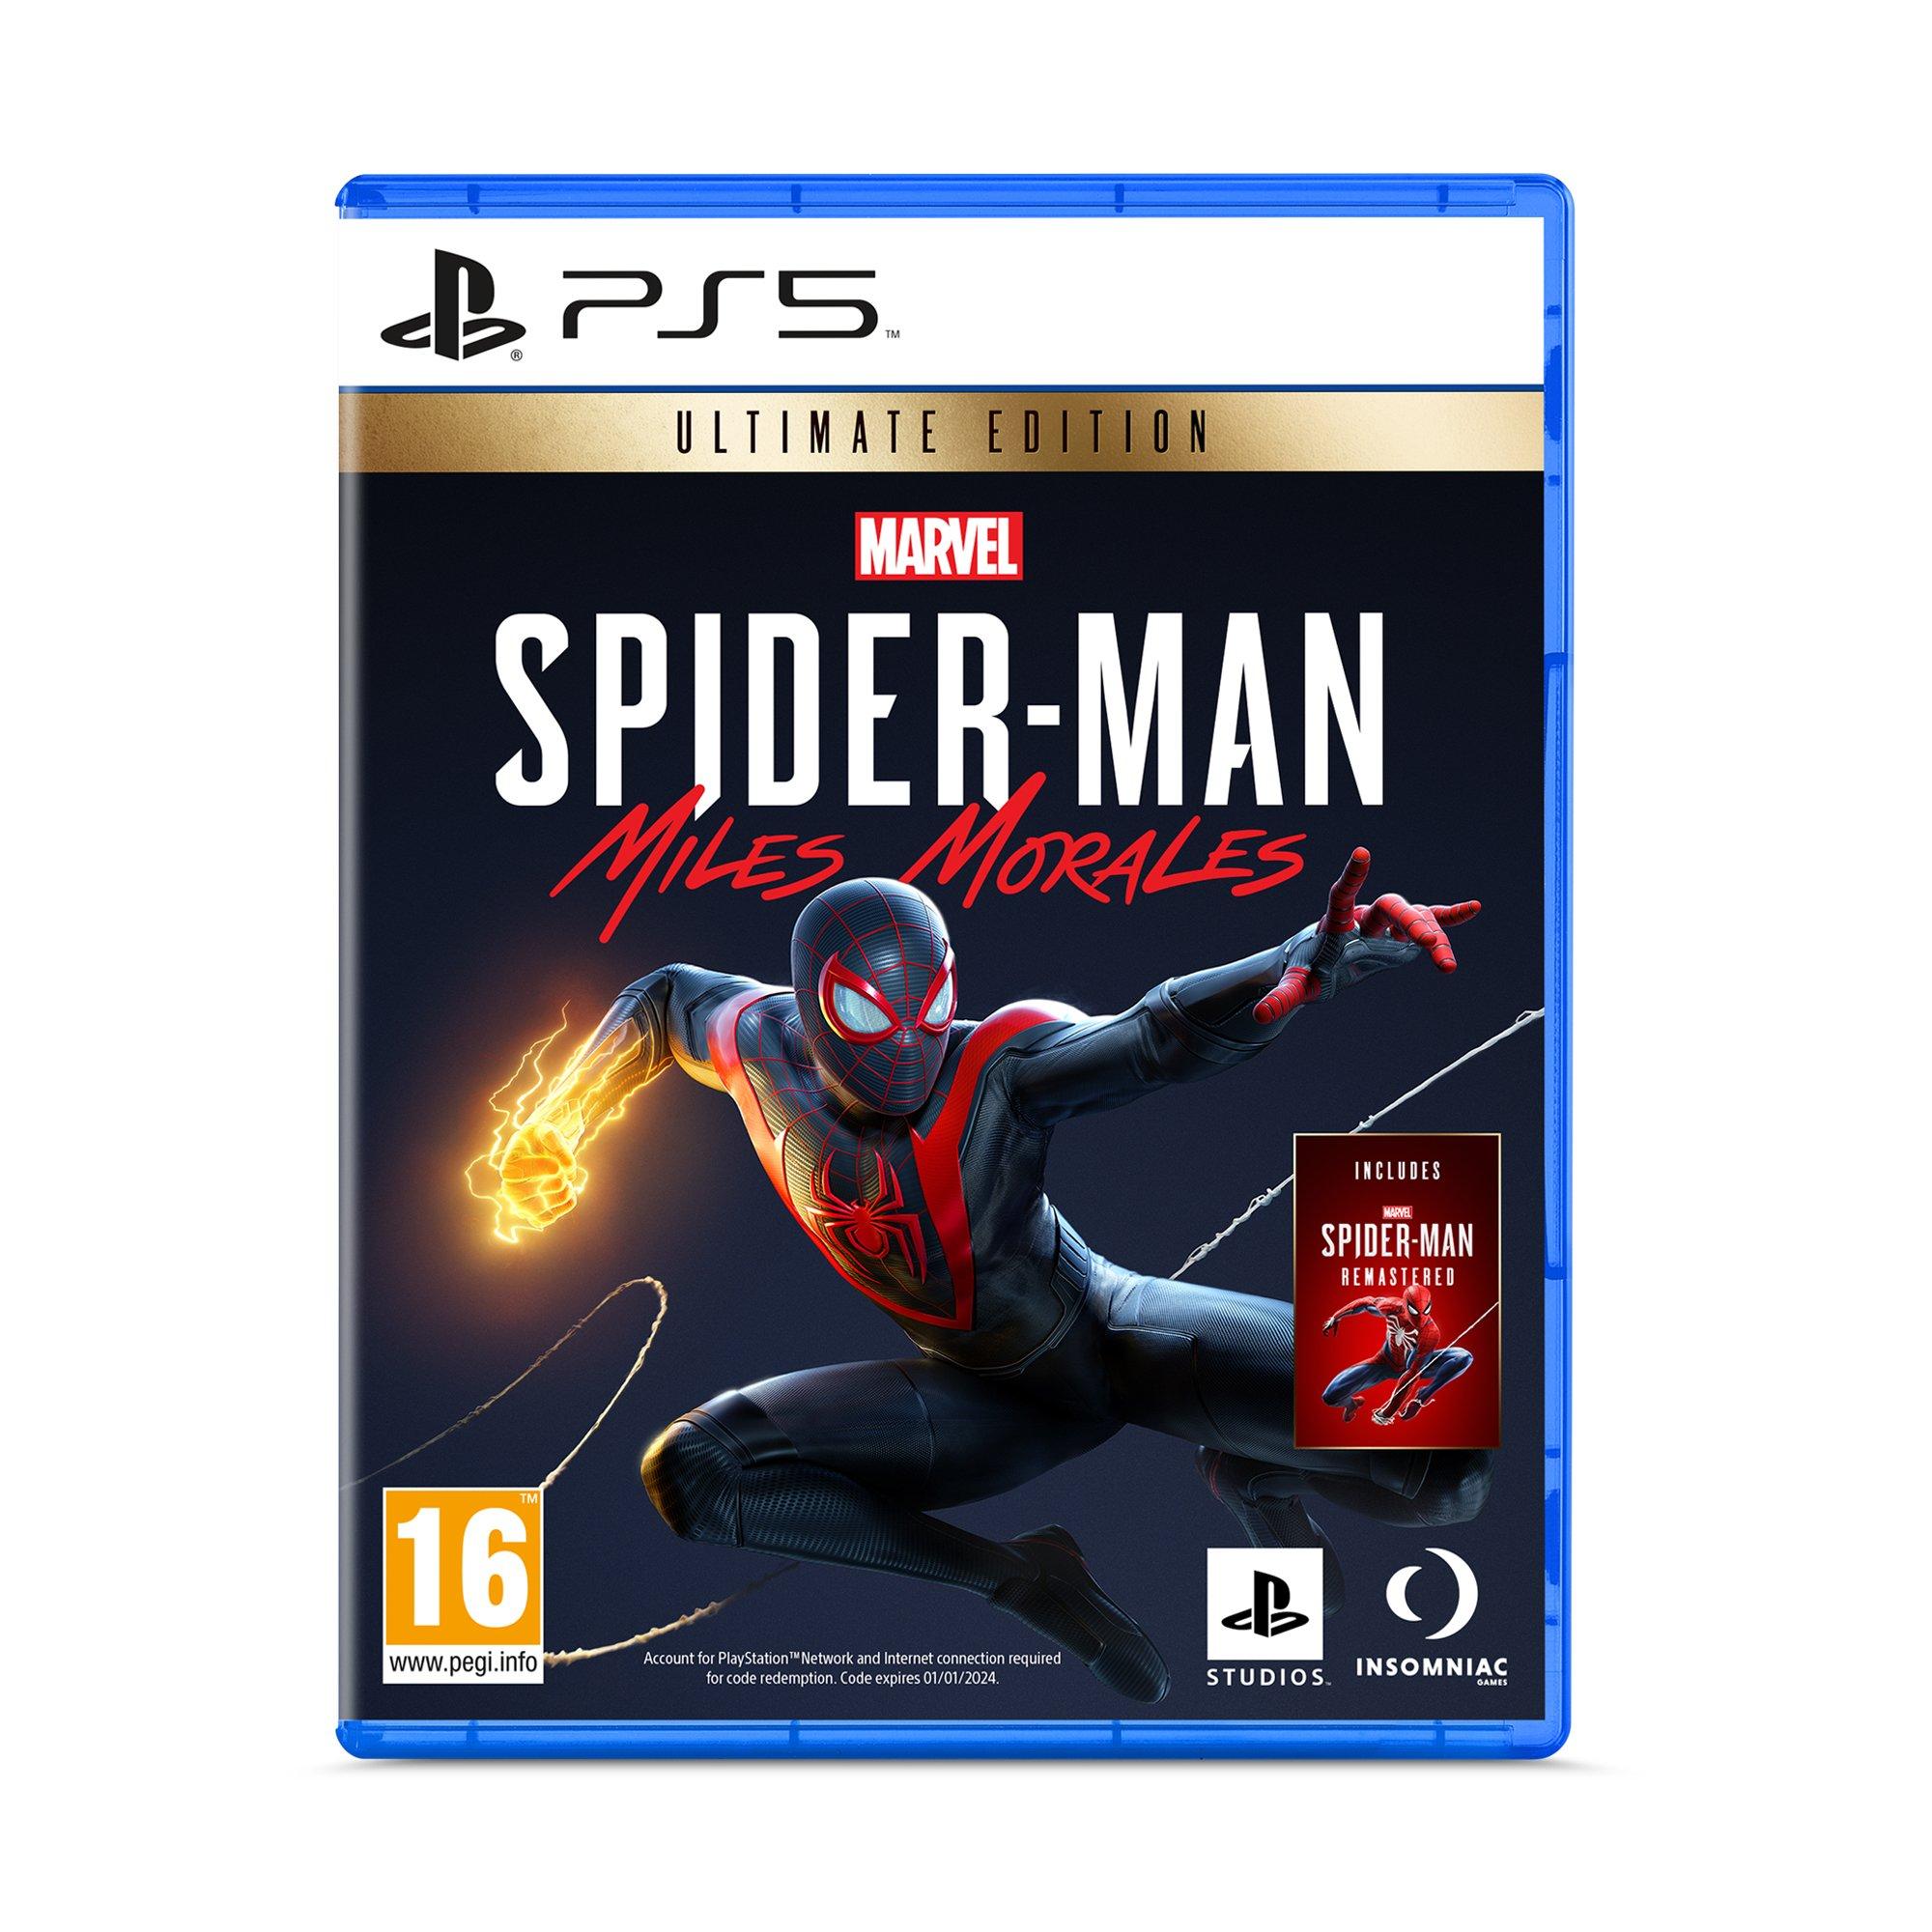 Image of Insommniac Marvel's Spider-Man: Miles Morales Ultimate Edition (PS5) DE, FR, IT